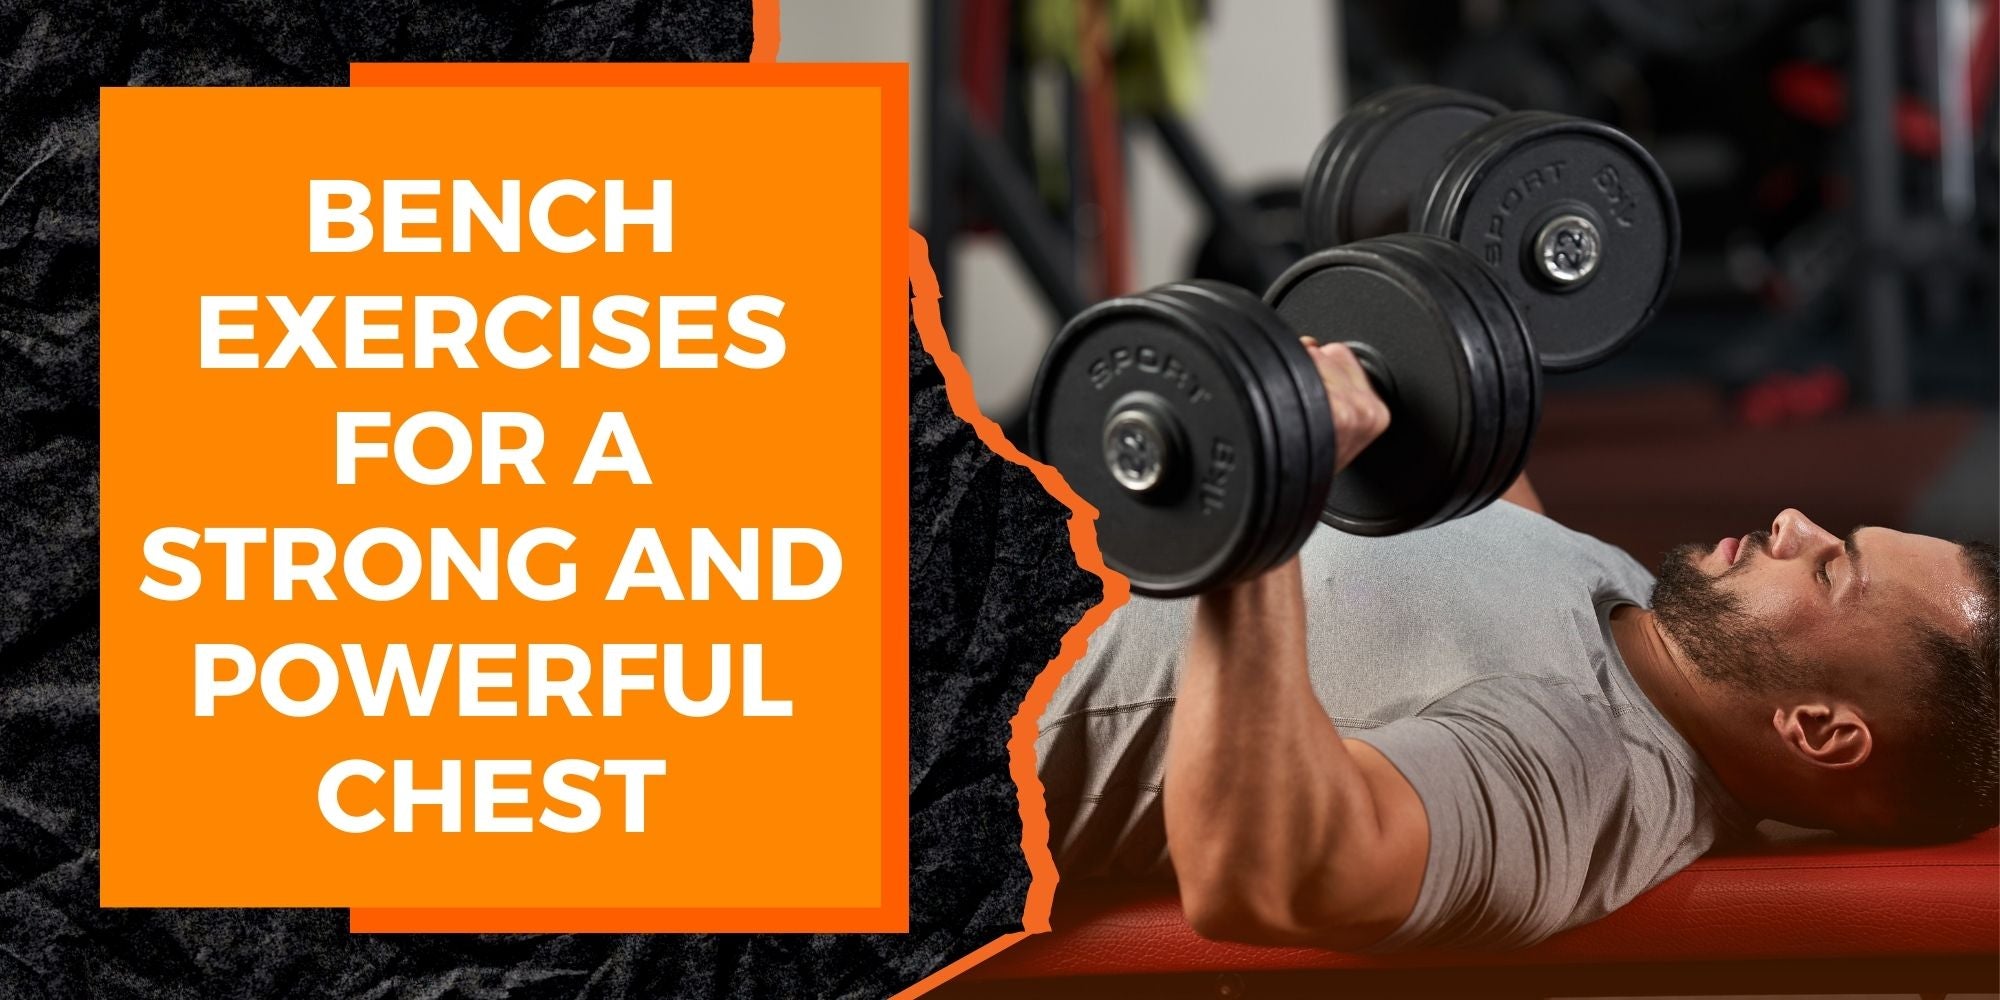 Bench Exercises for a Strong and Powerful Chest